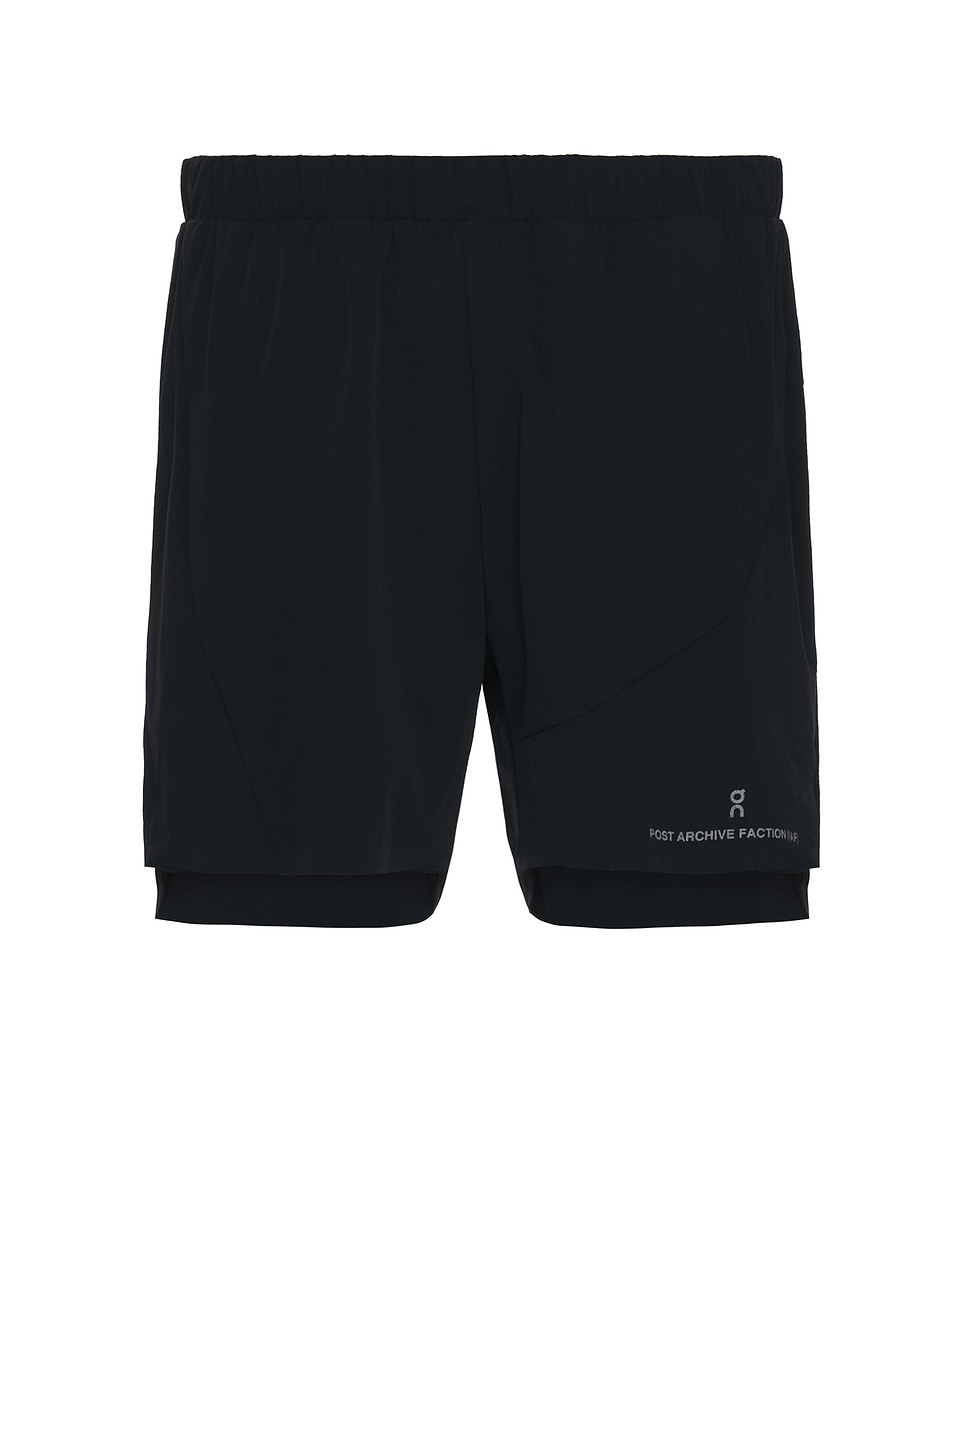 Image 1 of On x Post Archive Faction (PAF) Shorts in Black